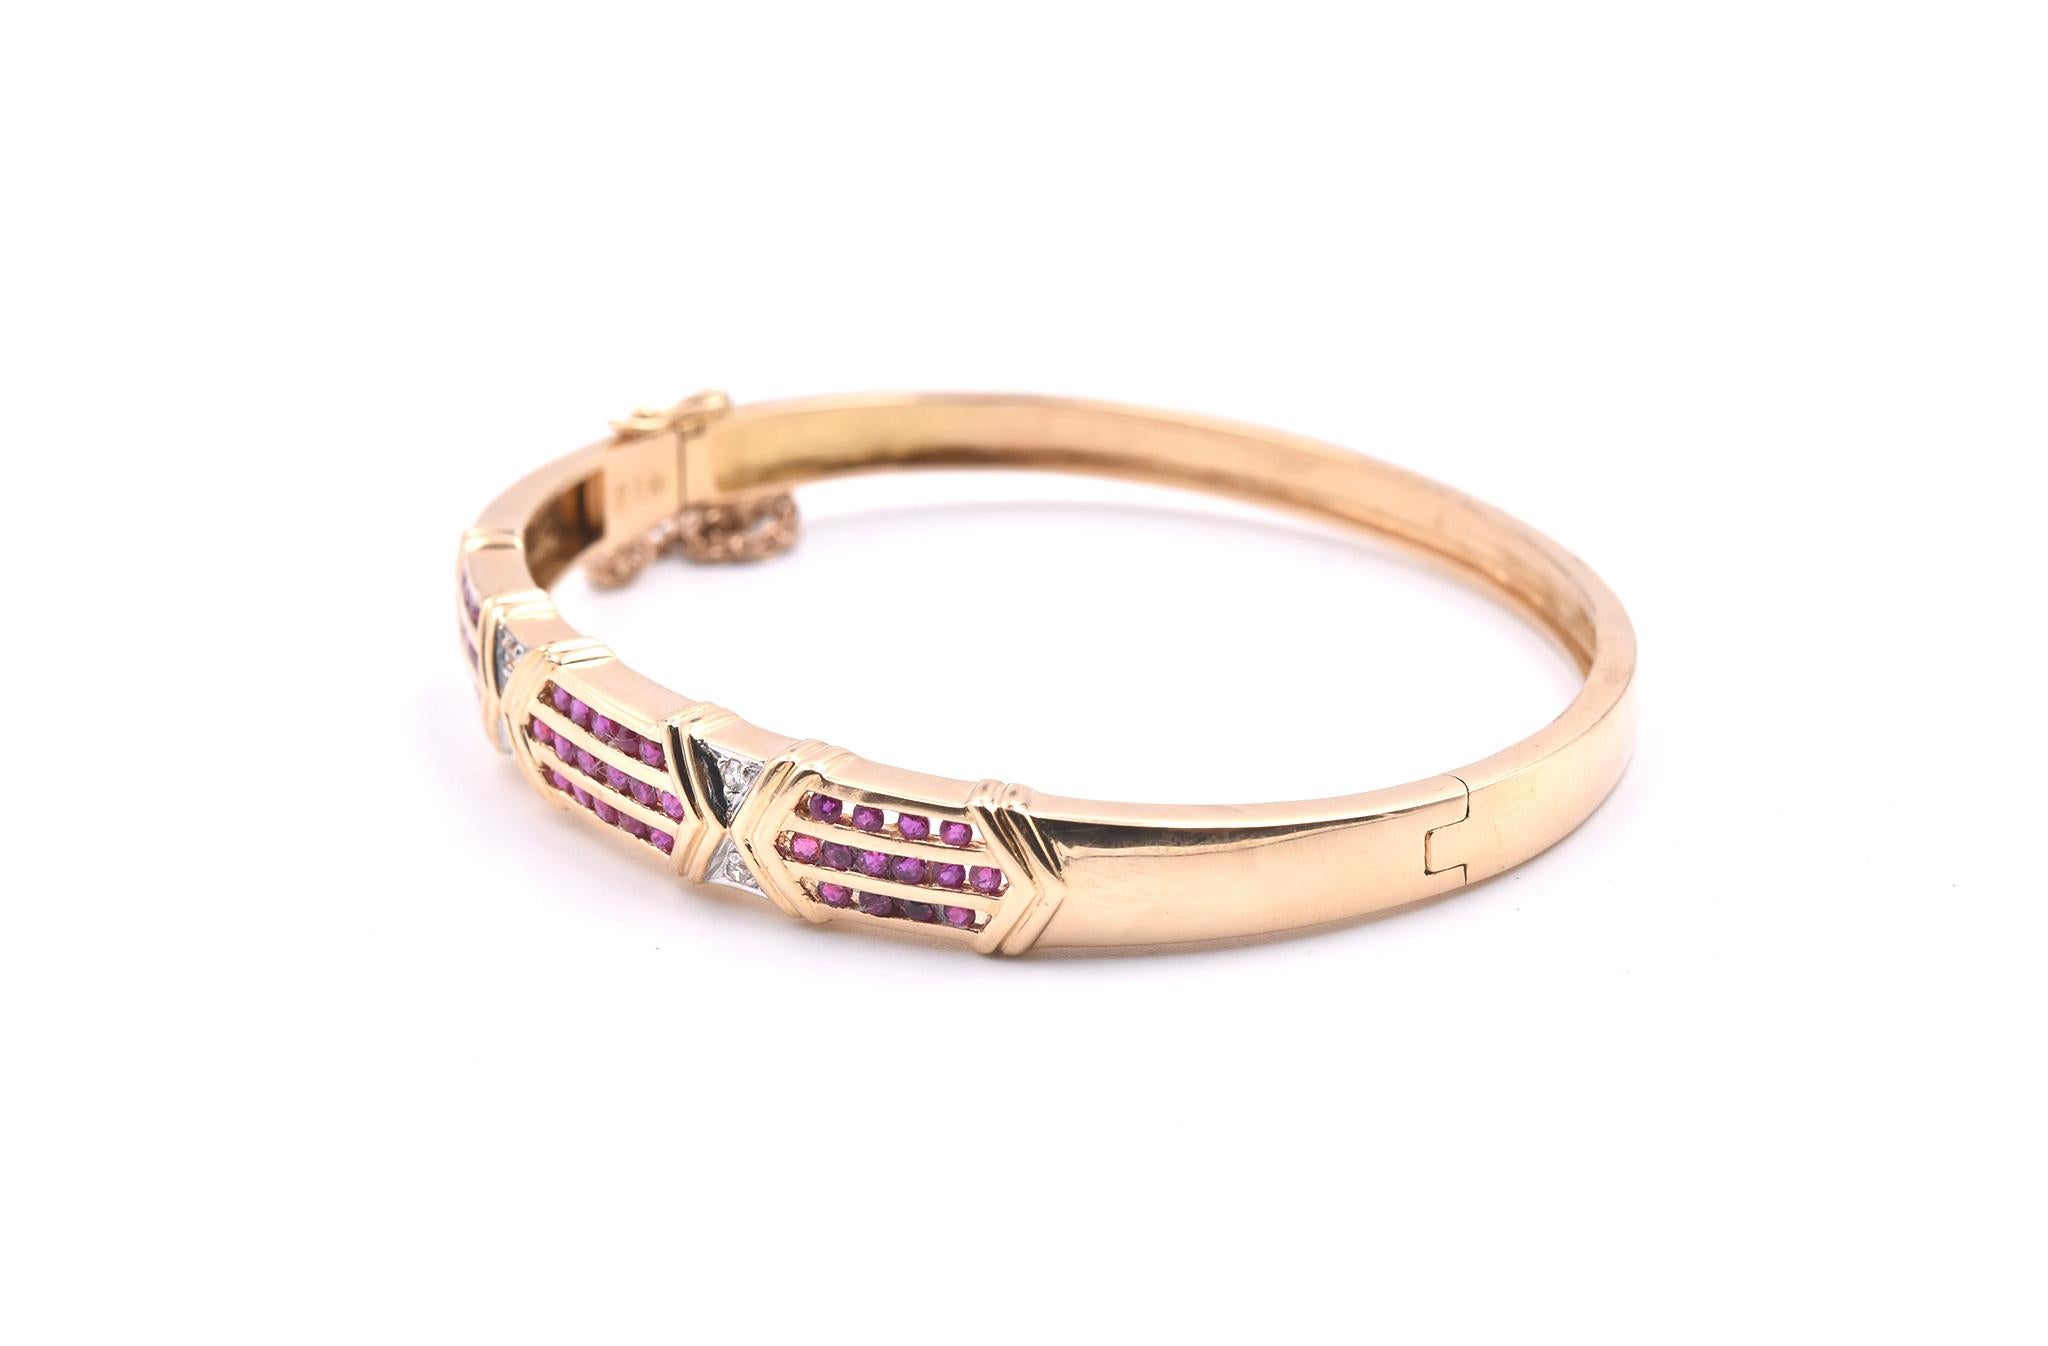 Designer: custom design
Material: 18k yellow gold
Ruby: 44 round cut= .67cttw
Diamonds: 4 round brilliant cut= .04cttw
Color: G
Clarity: VS
Dimensions: bracelet will fit a 6 ½ -inch wrist and it is 8.28mm wide at its widest point 
Weight:  20.37